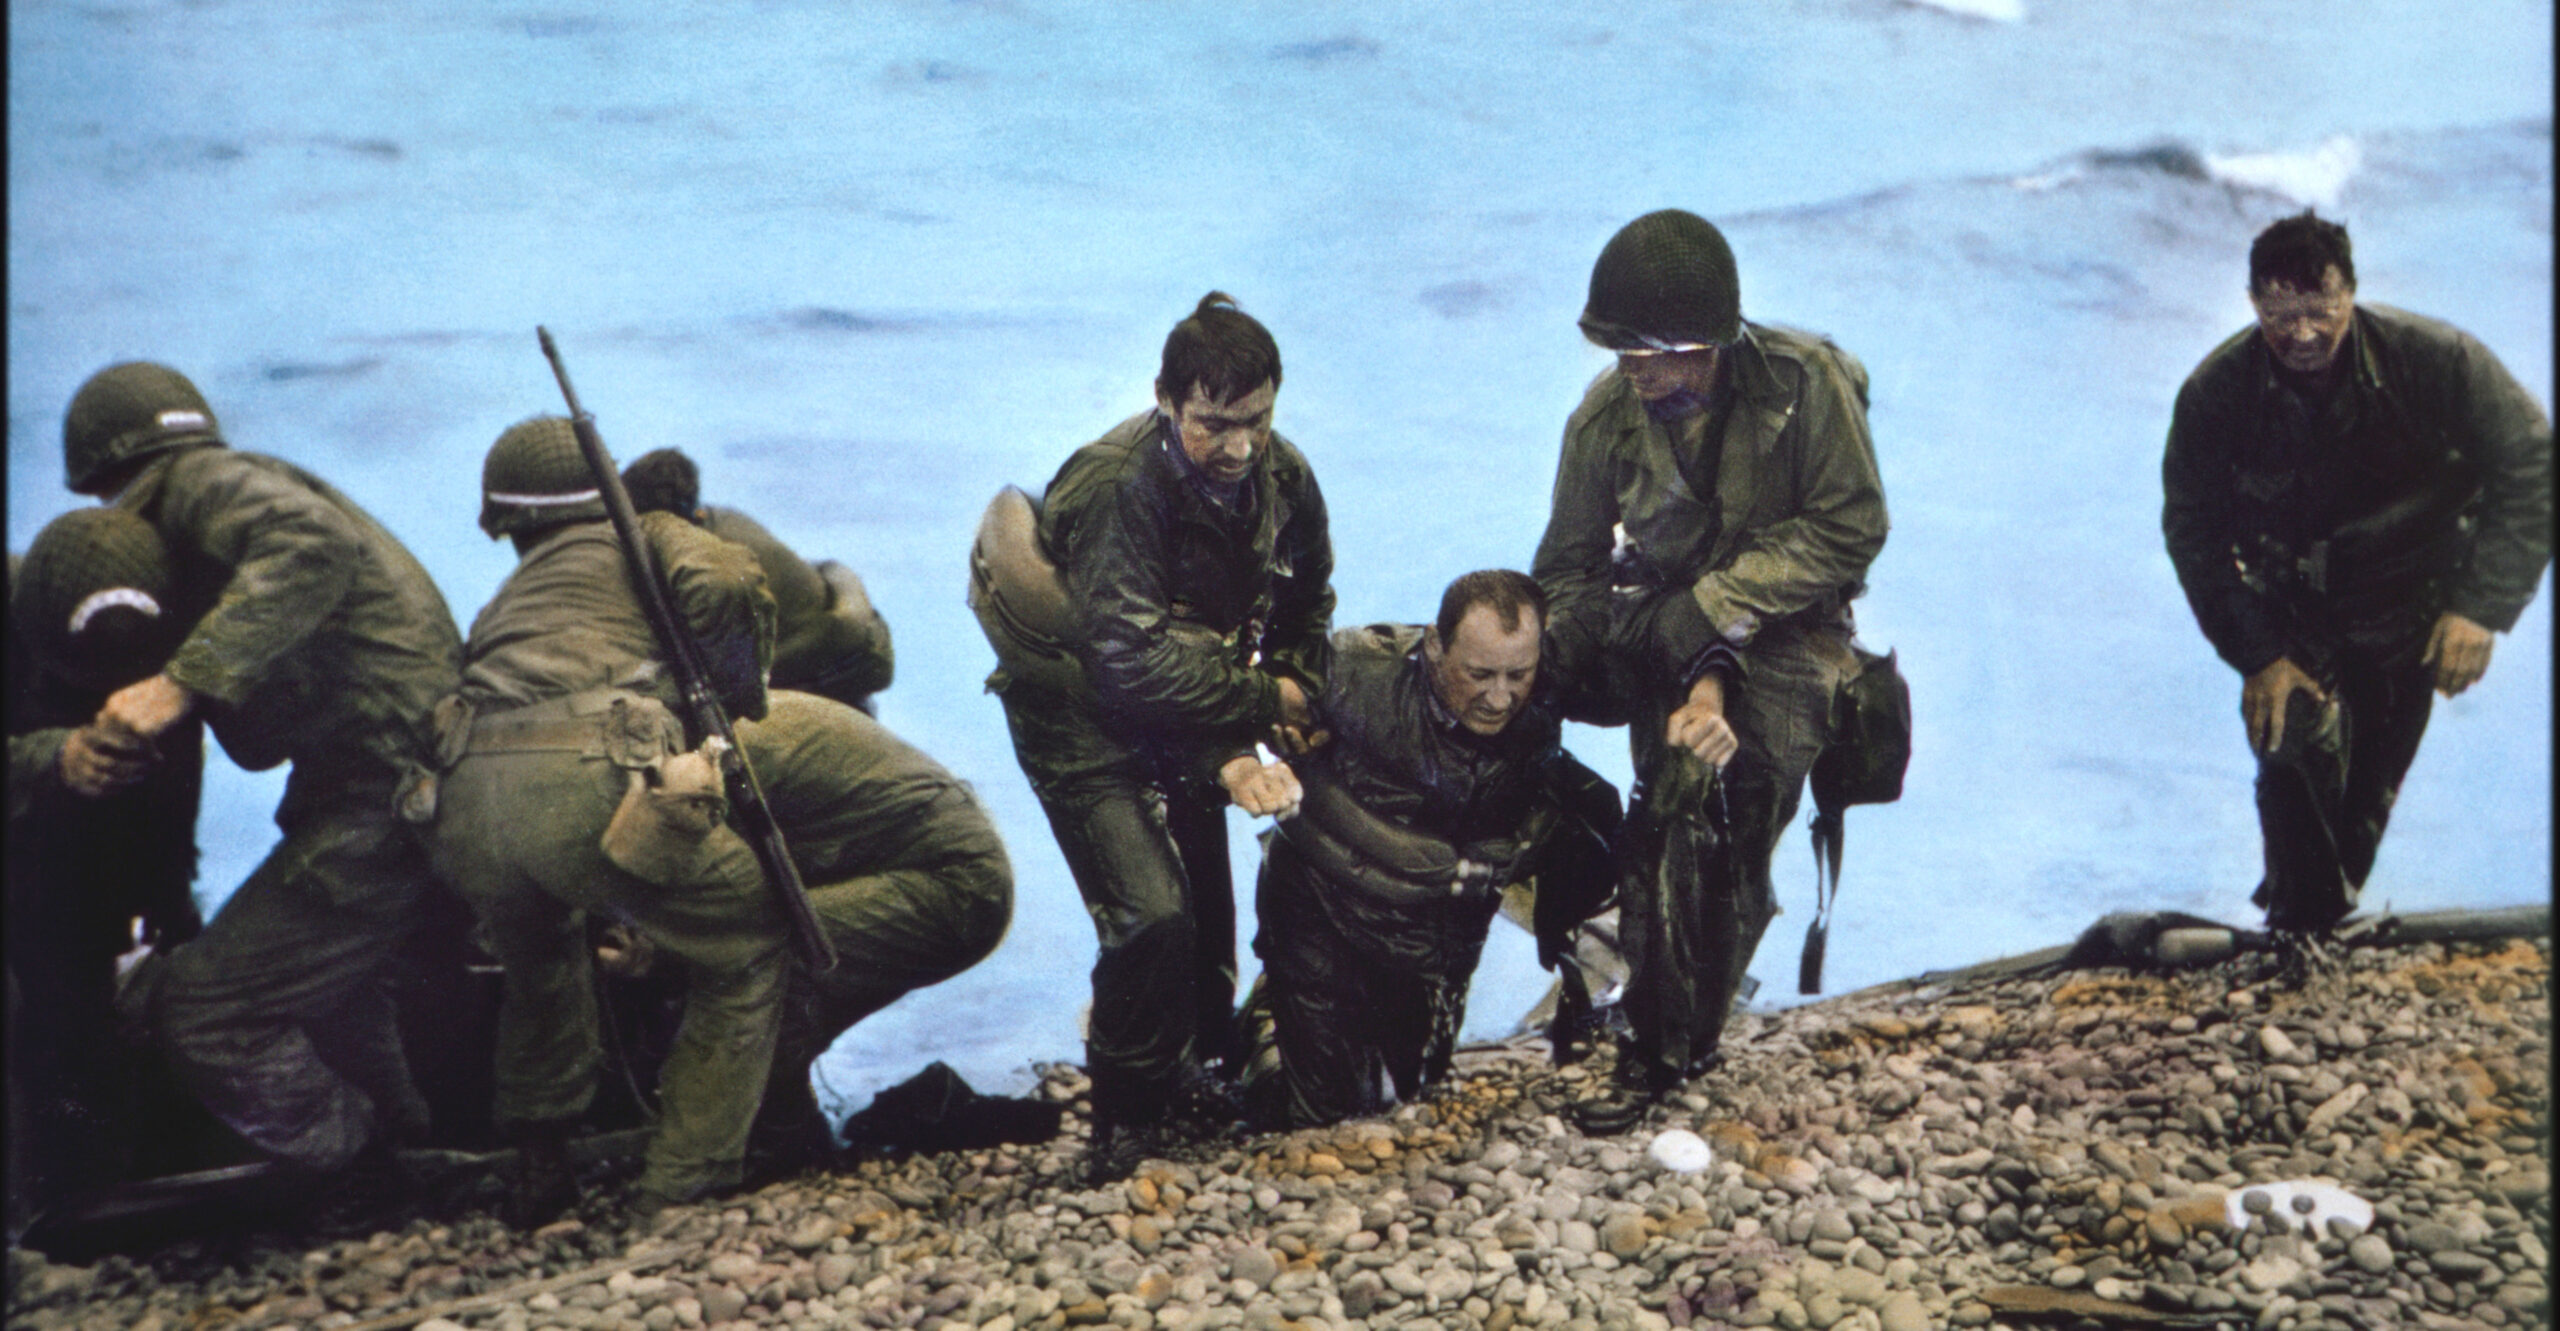 Remembering D-Day and Liberation of Europe, Saving of Western World